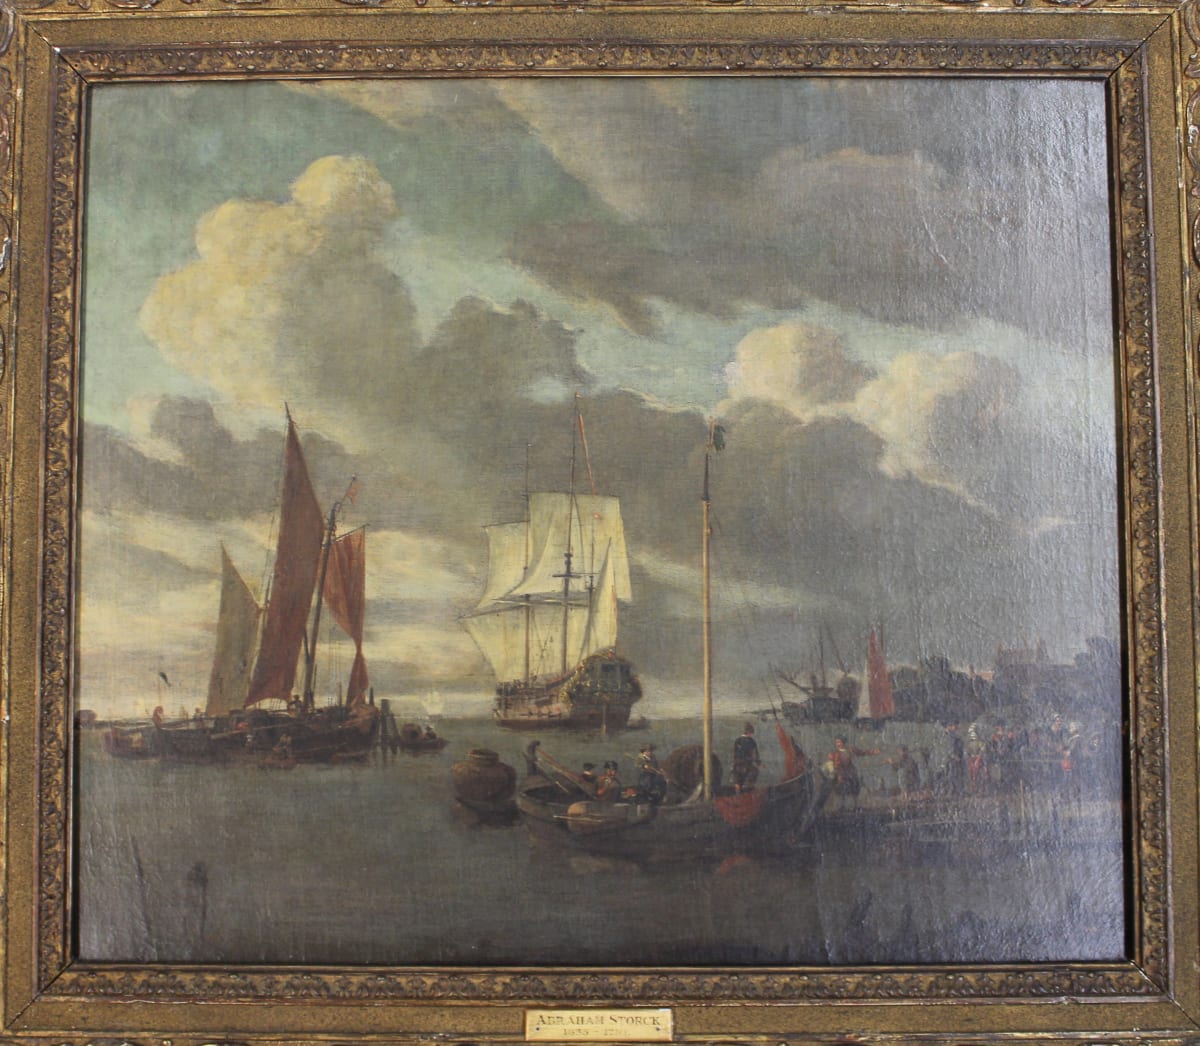 Shipping by the Shoreline by Abraham Storck 